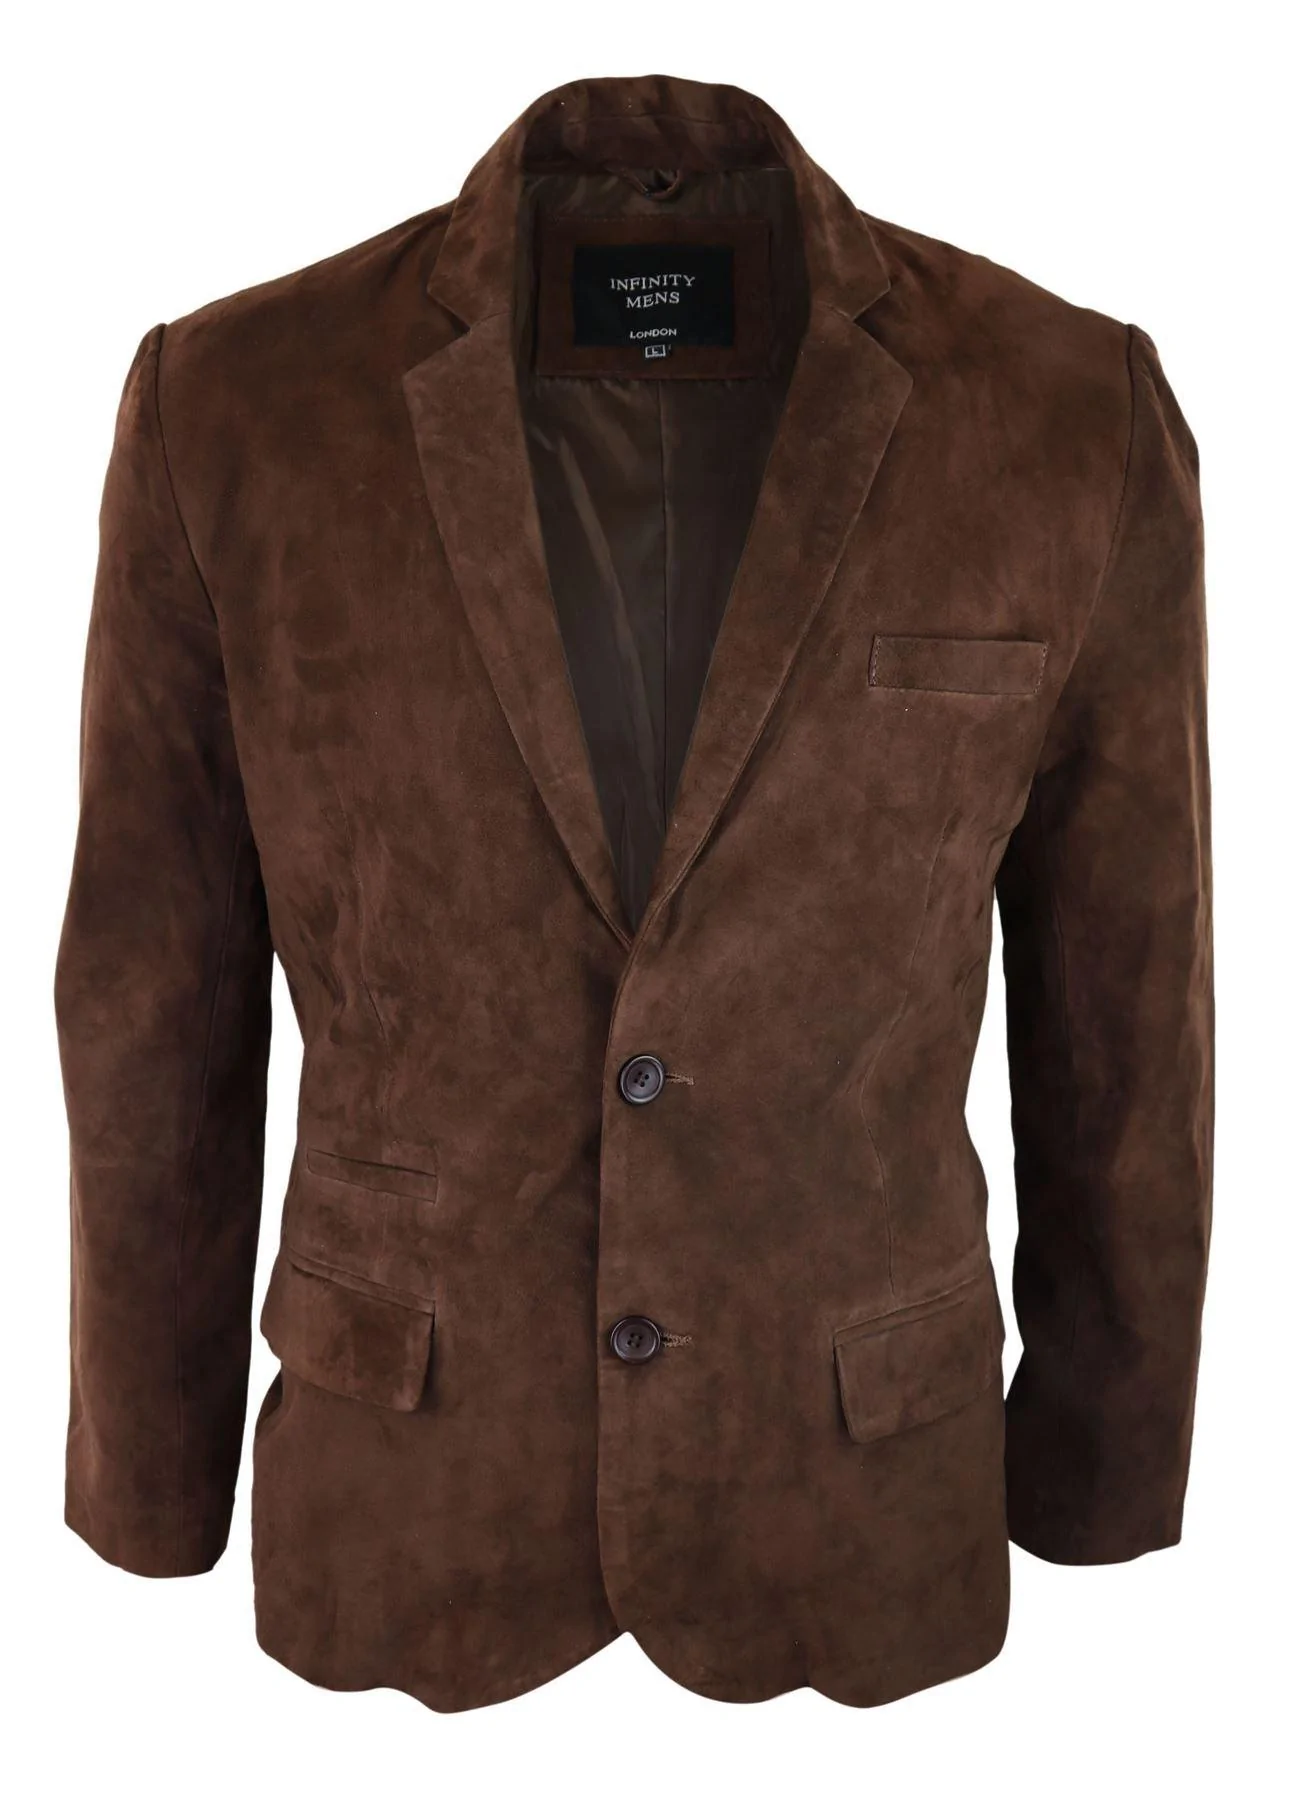 Suede Jacket Outfits for Men  34 Ways to Wear Suede Jackets